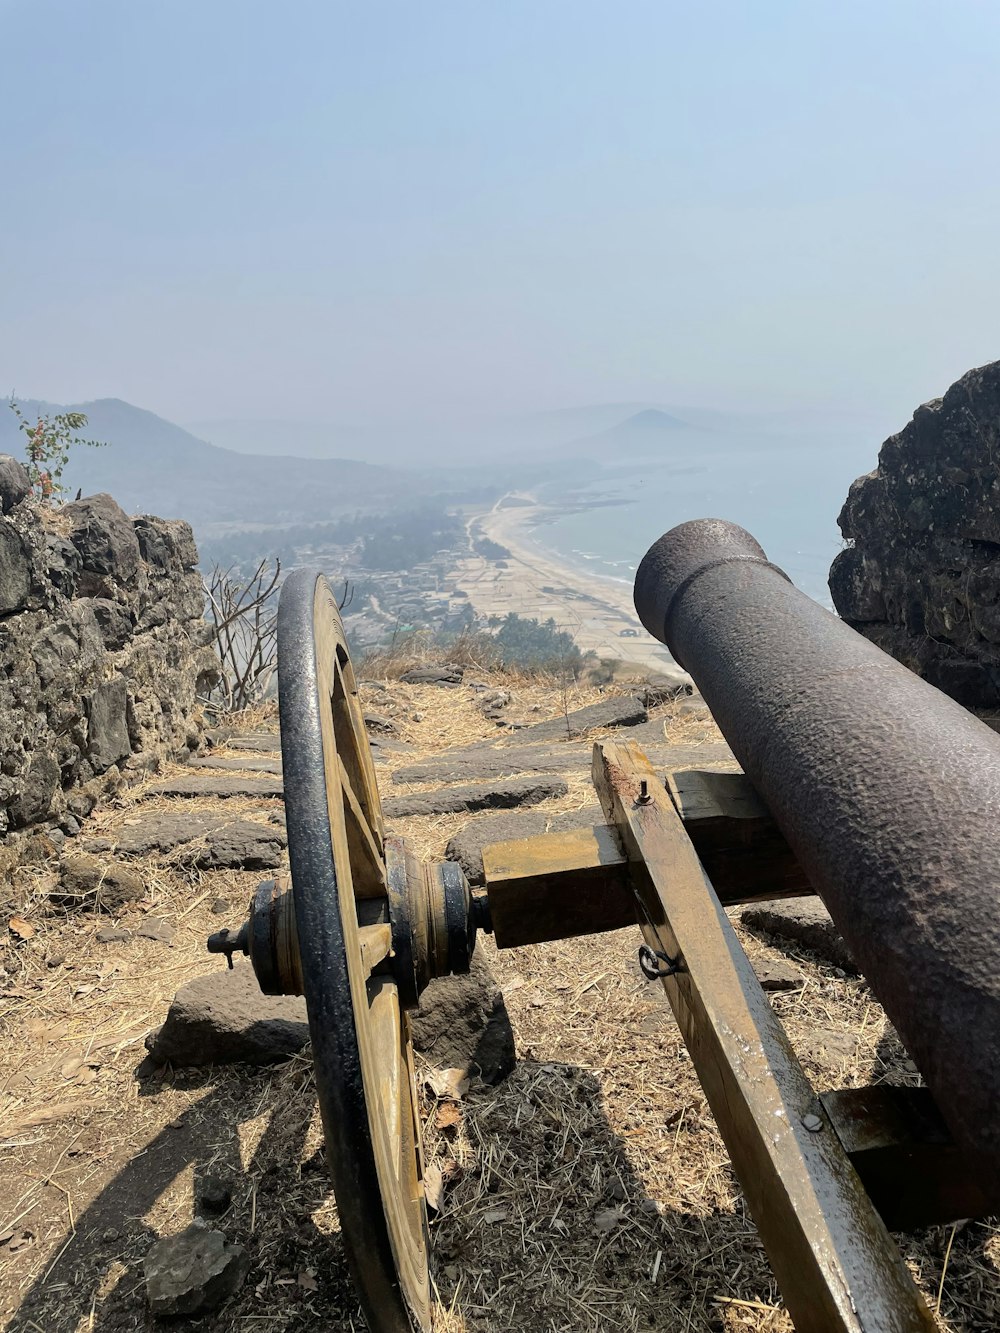 an old cannon on a hill with a view of the ocean